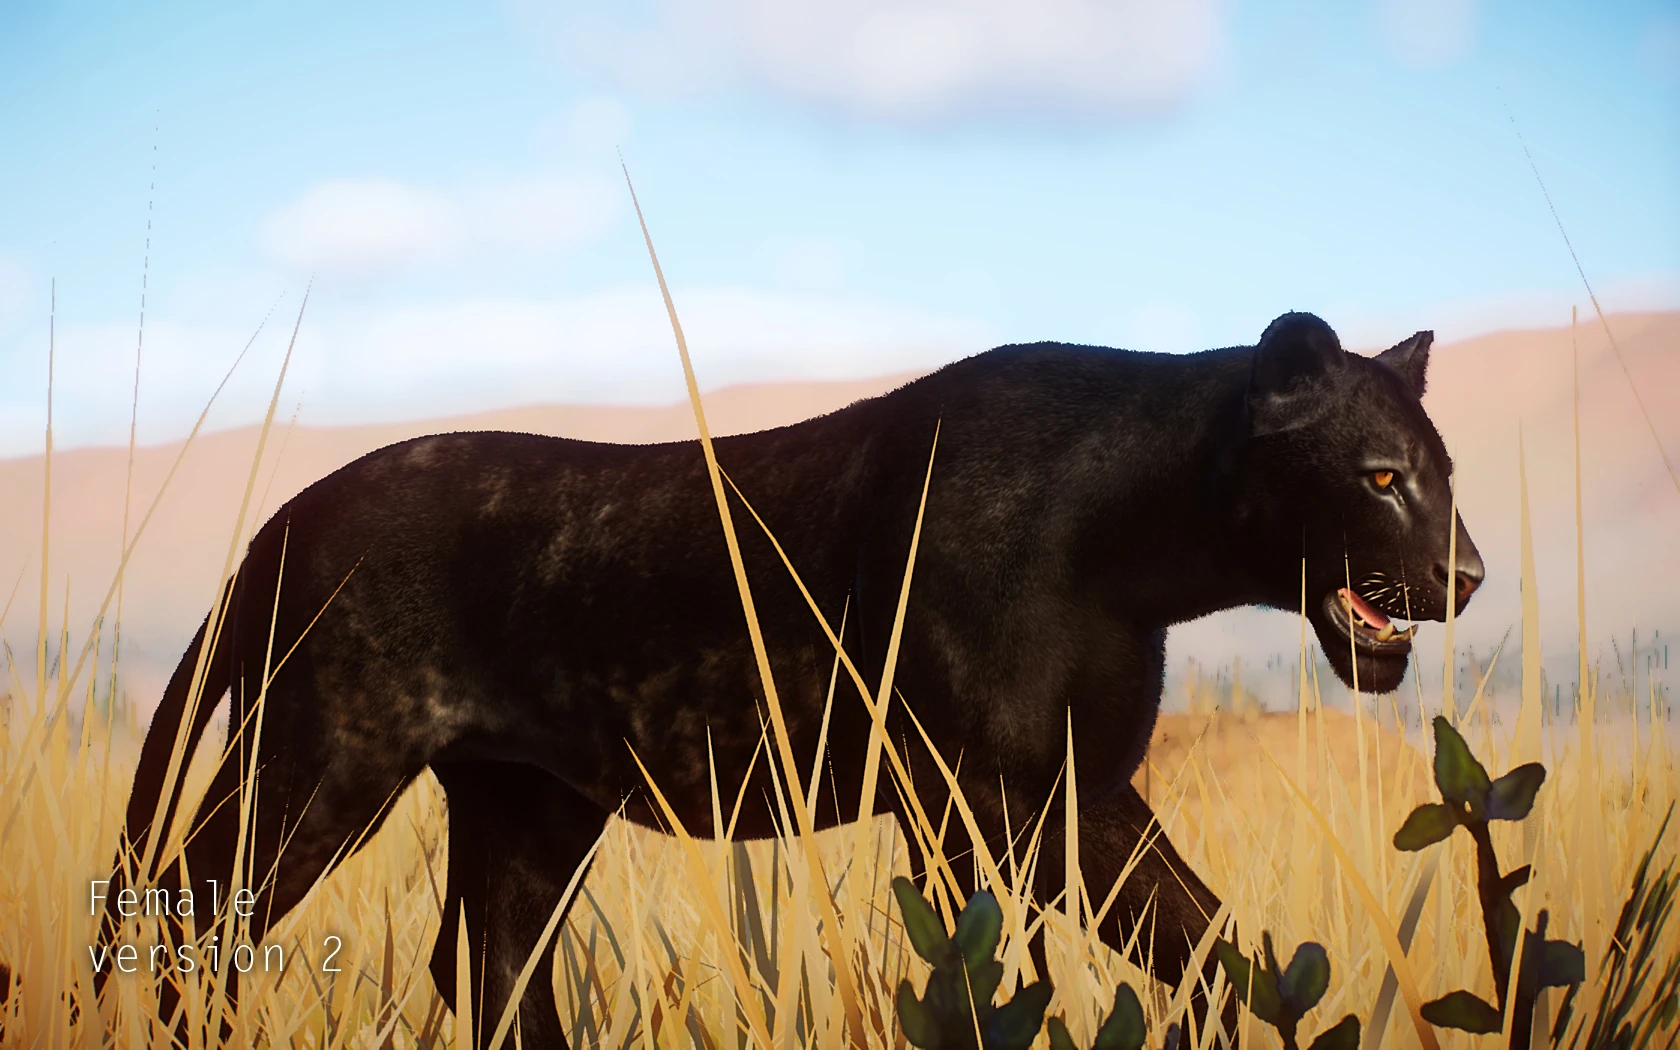 Melanistic Lion At Planet Zoo Nexus Mods And Community